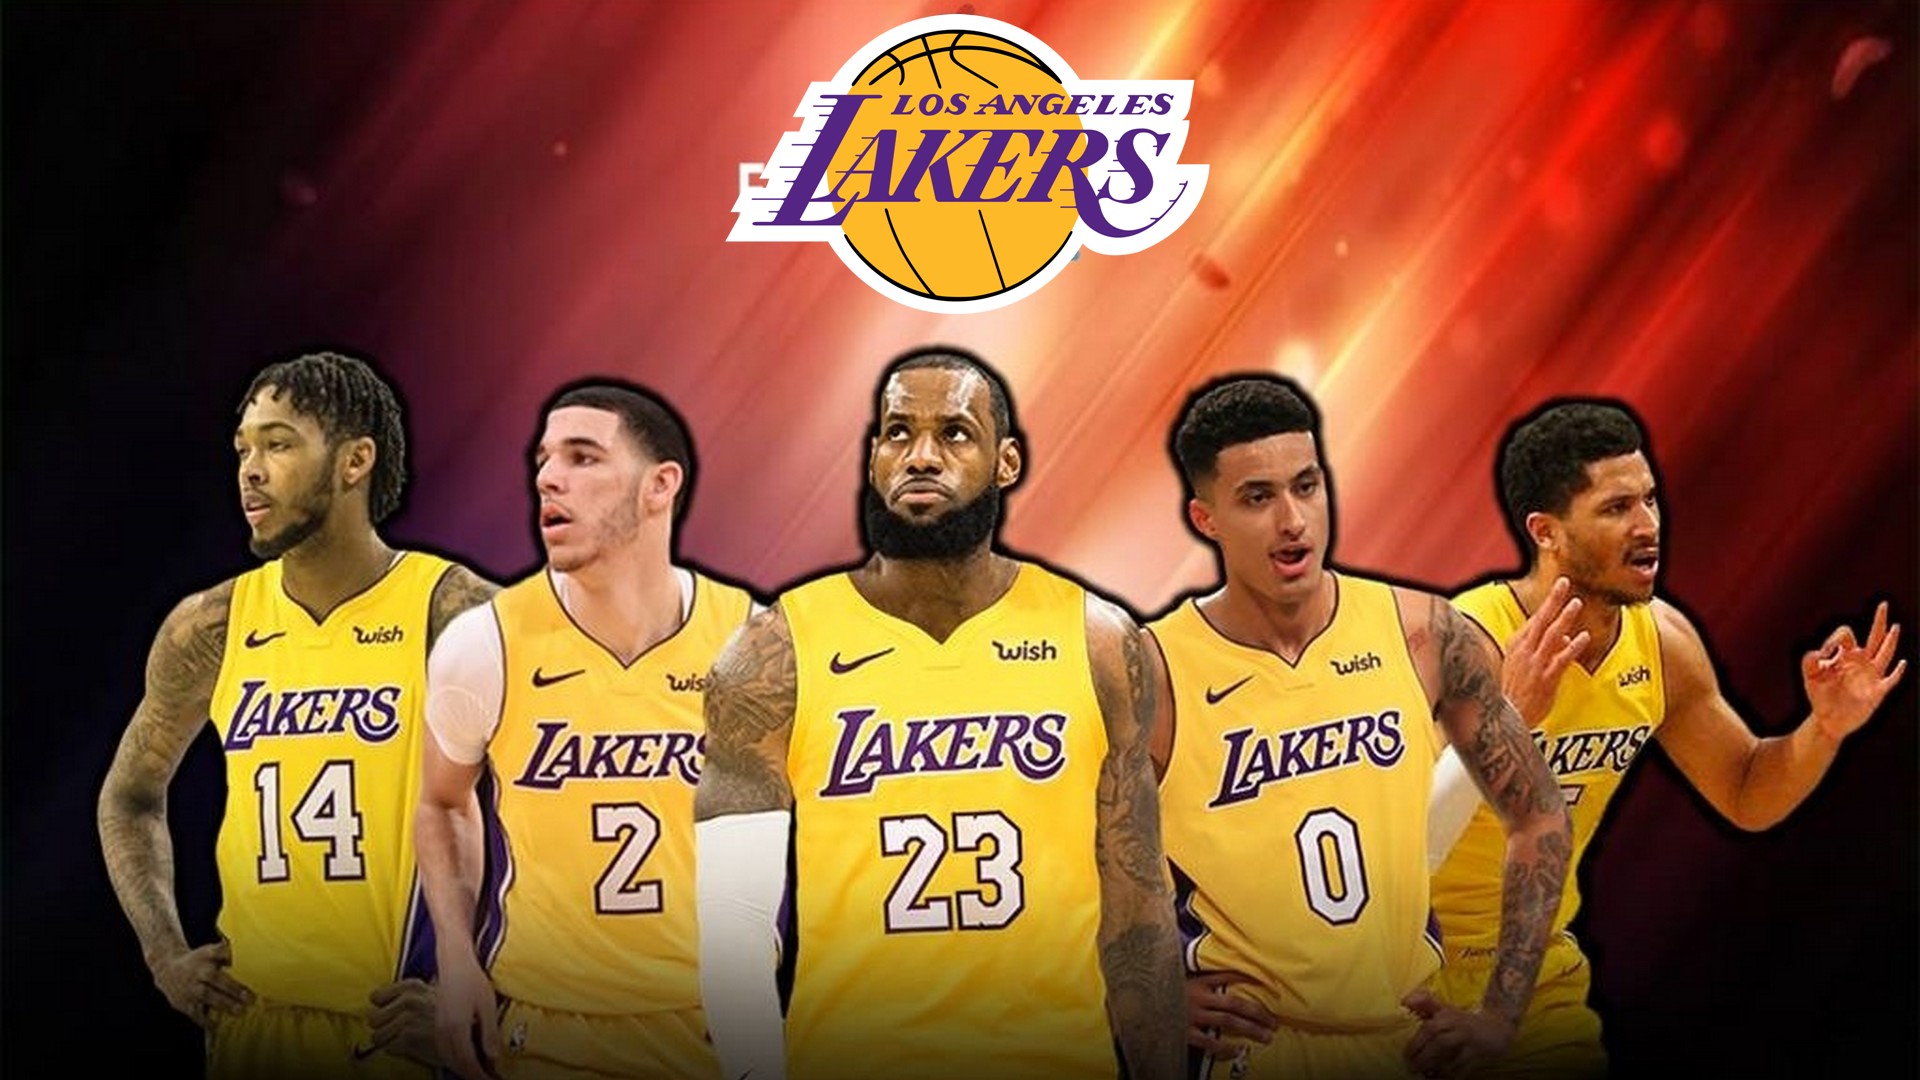 LA Lakers Wallpaper HD with image dimensions 1920x1080 pixel. You can make this wallpaper for your Desktop Computer Backgrounds, Windows or Mac Screensavers, iPhone Lock screen, Tablet or Android and another Mobile Phone device